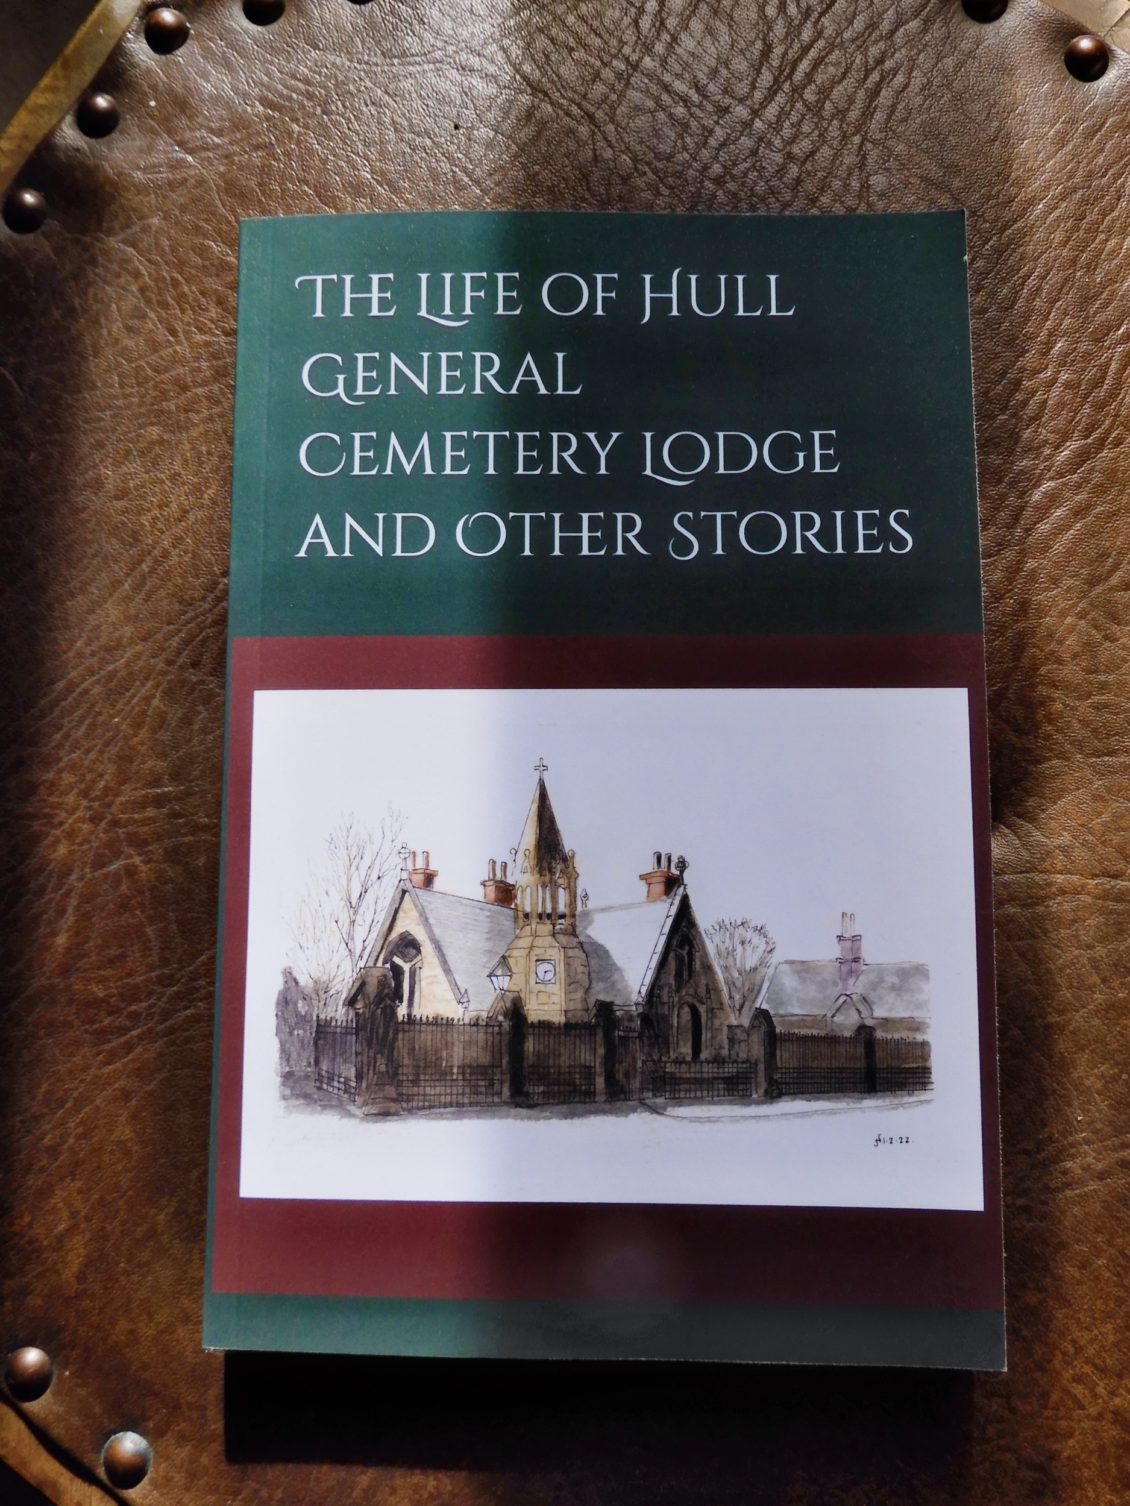 The Life of Hull General Cemetery Lodge and Other Stories